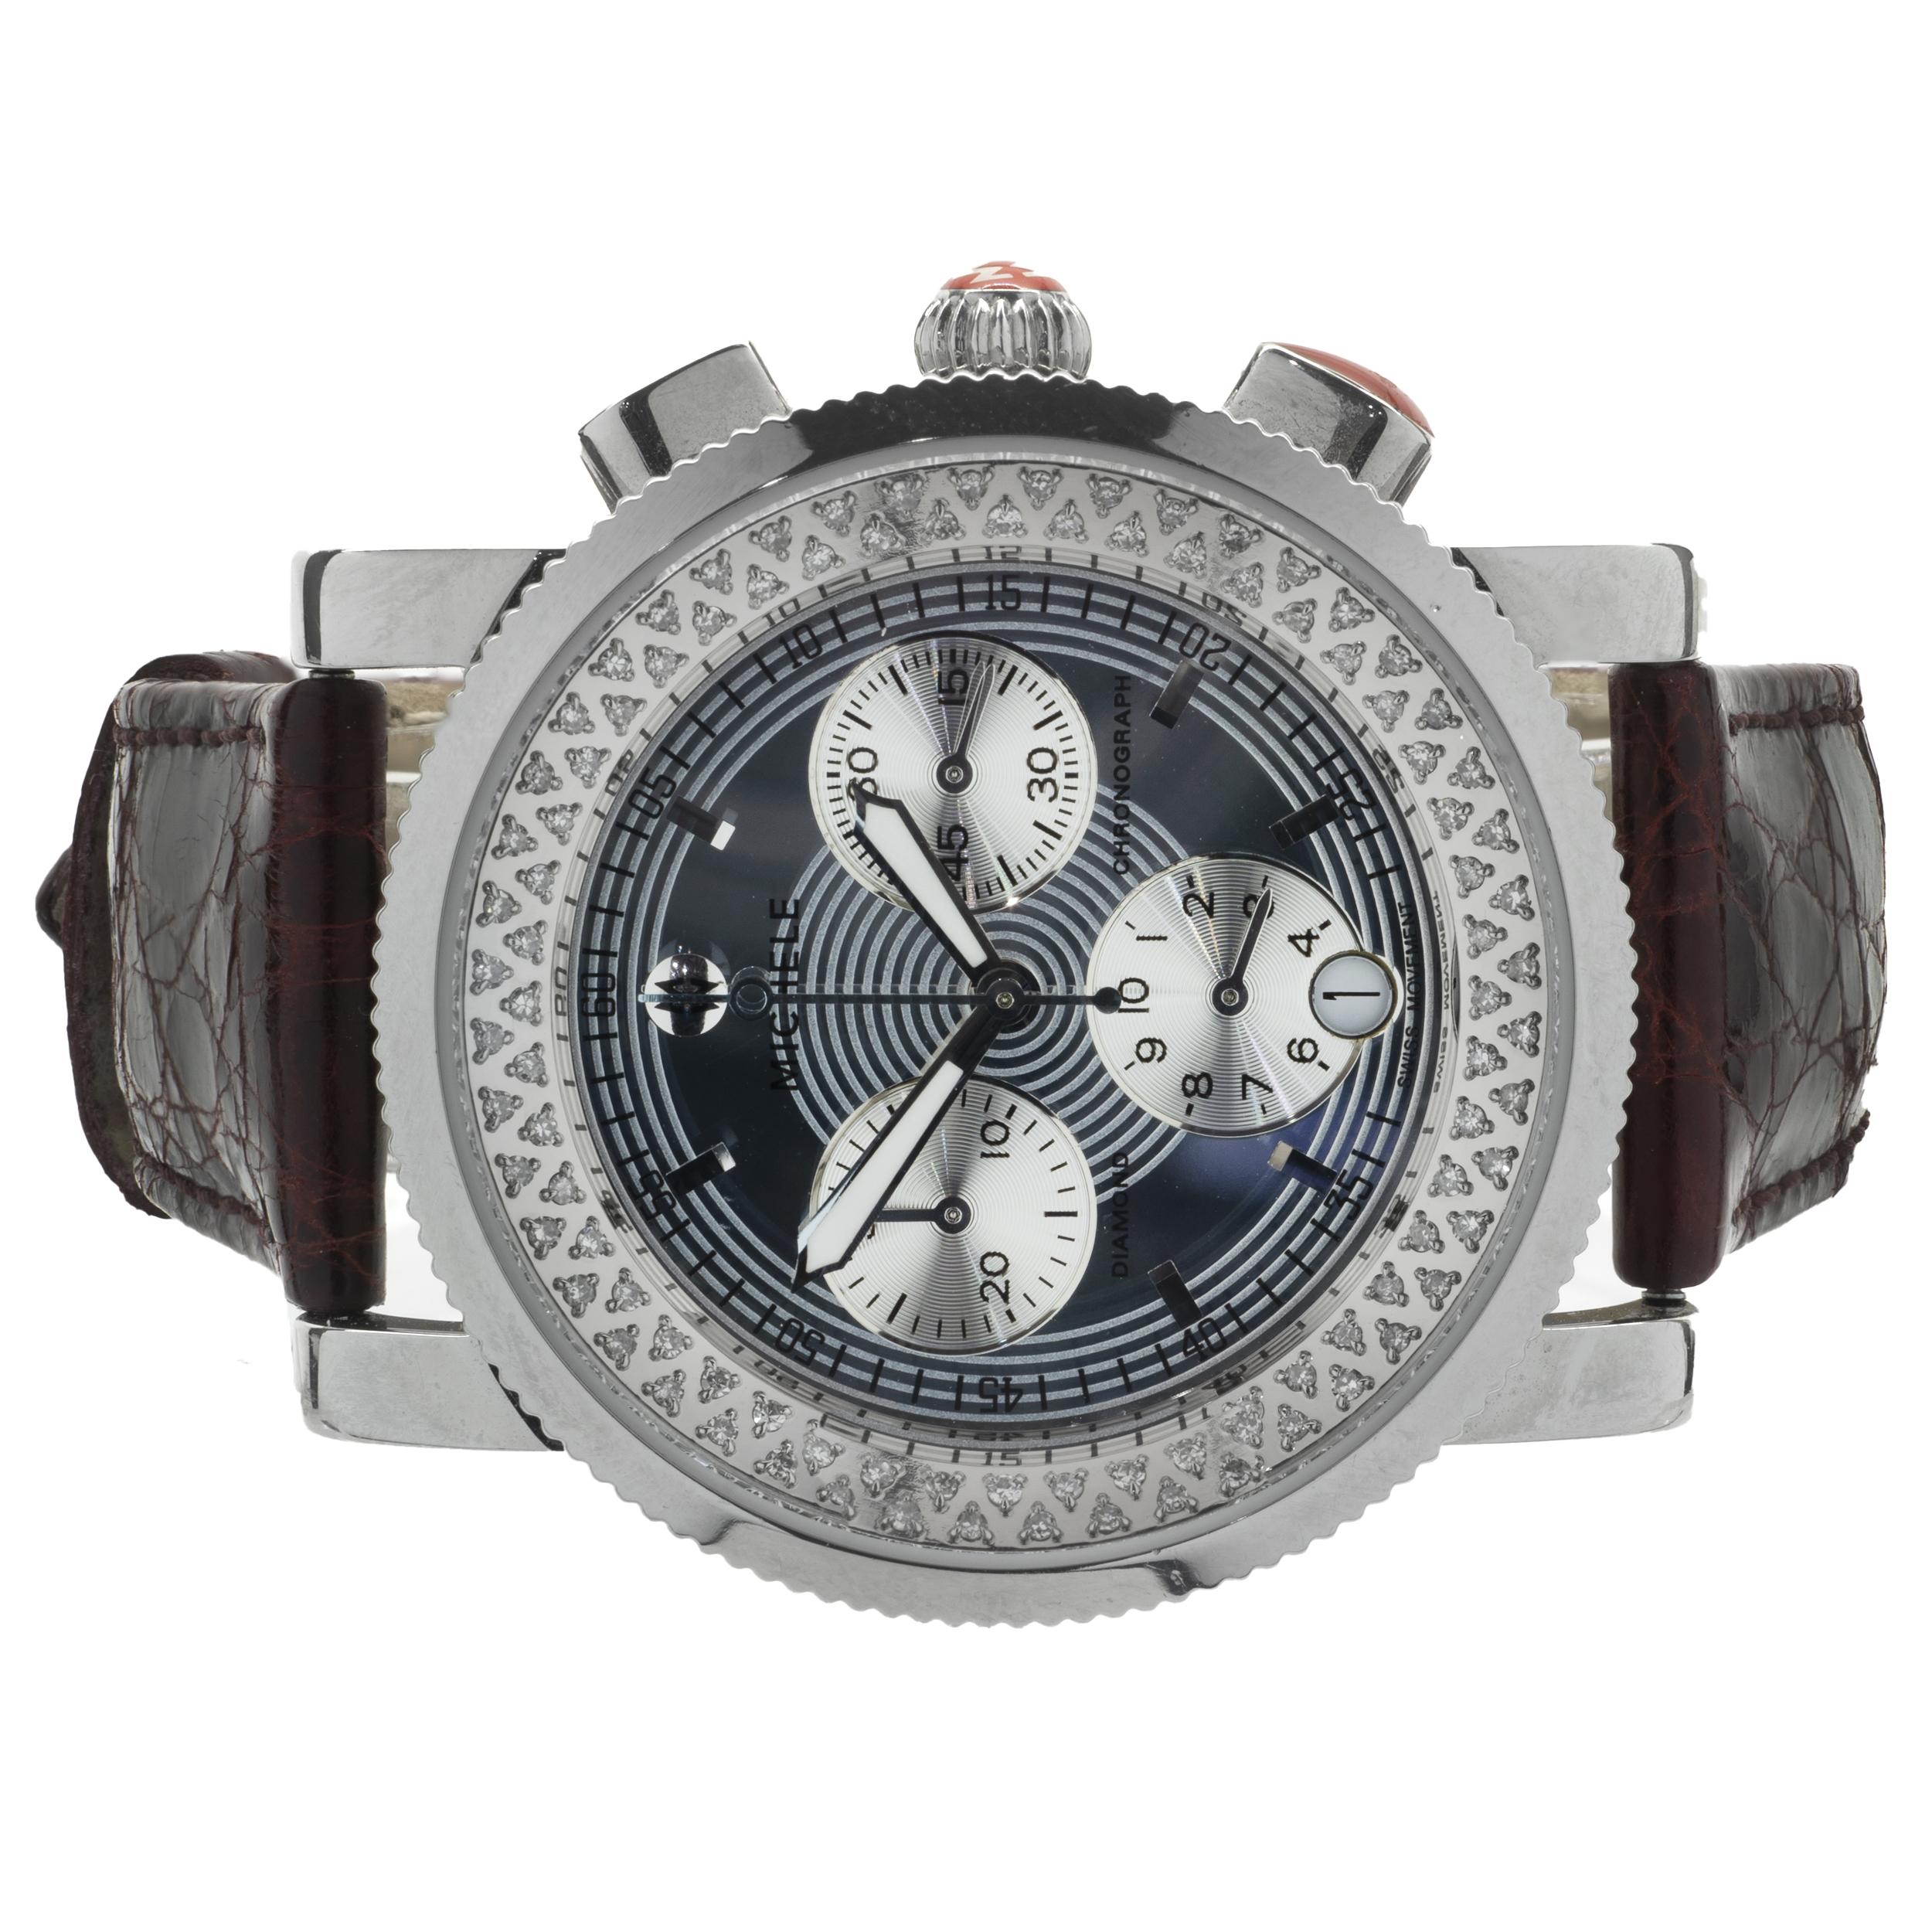 Movement: quartz
Function: hours, minutes, seconds, date, chronograph 
Case: 38mm stainless round case, sapphire crystal
Dial: mirror chronograph dial, stick hour markers 
Band: cherry crocodile strap with buckle
Serial #: XXX/XXX
Reference #: